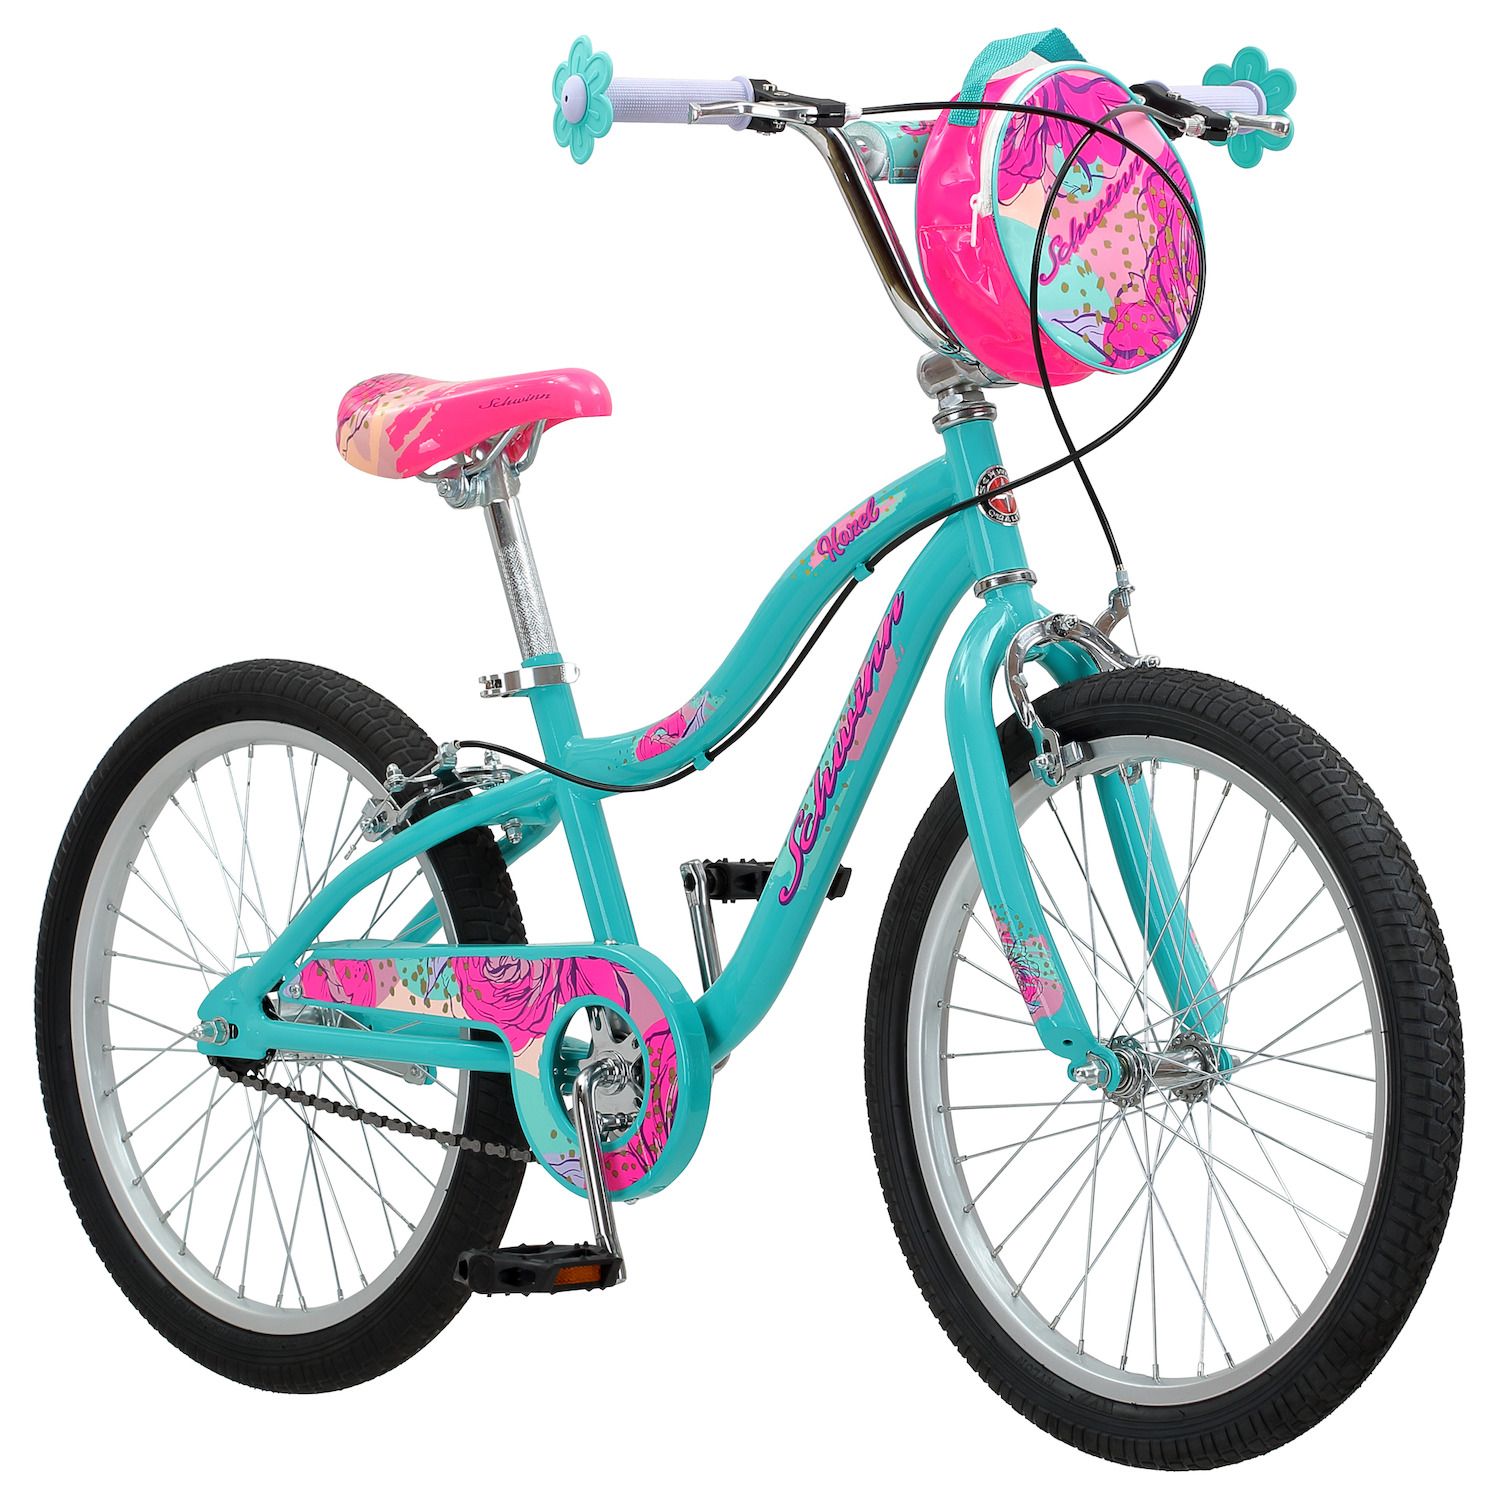 stylish cycle for girls